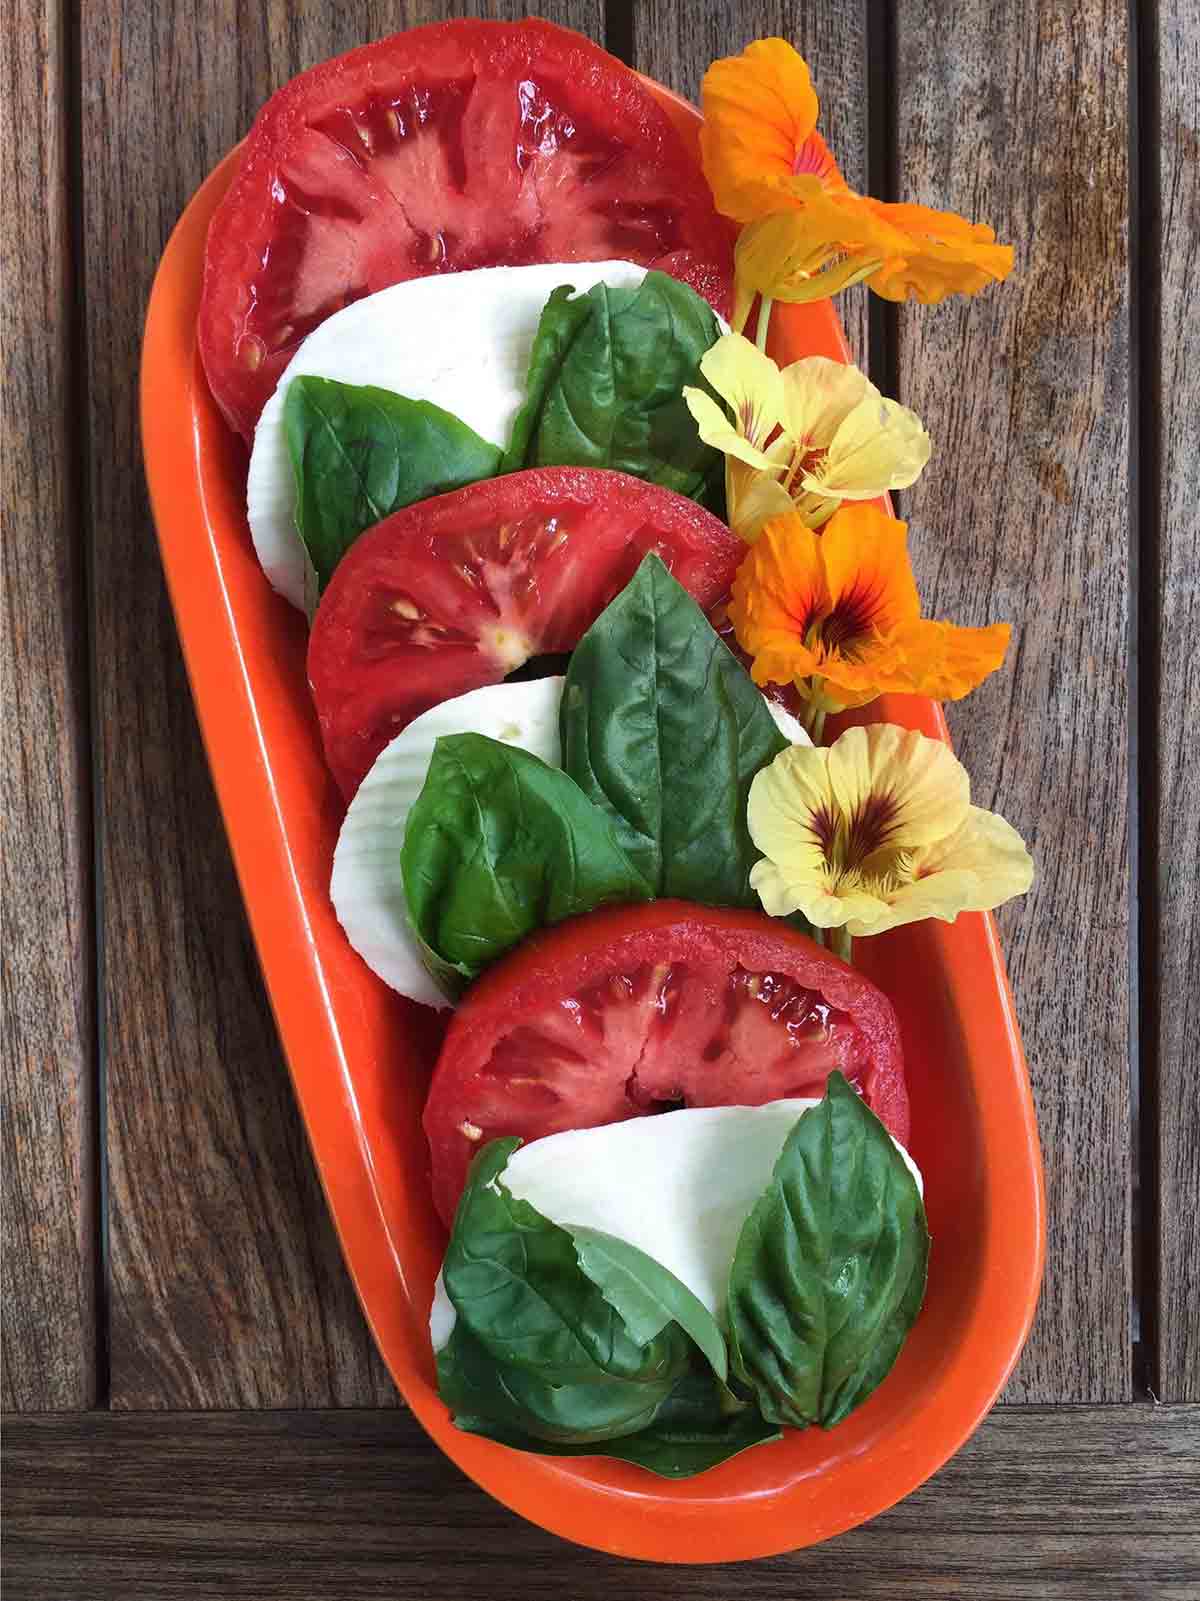 A caprese salad of tomato, mozzarella, and basil, garnished with flowers on a red platter.